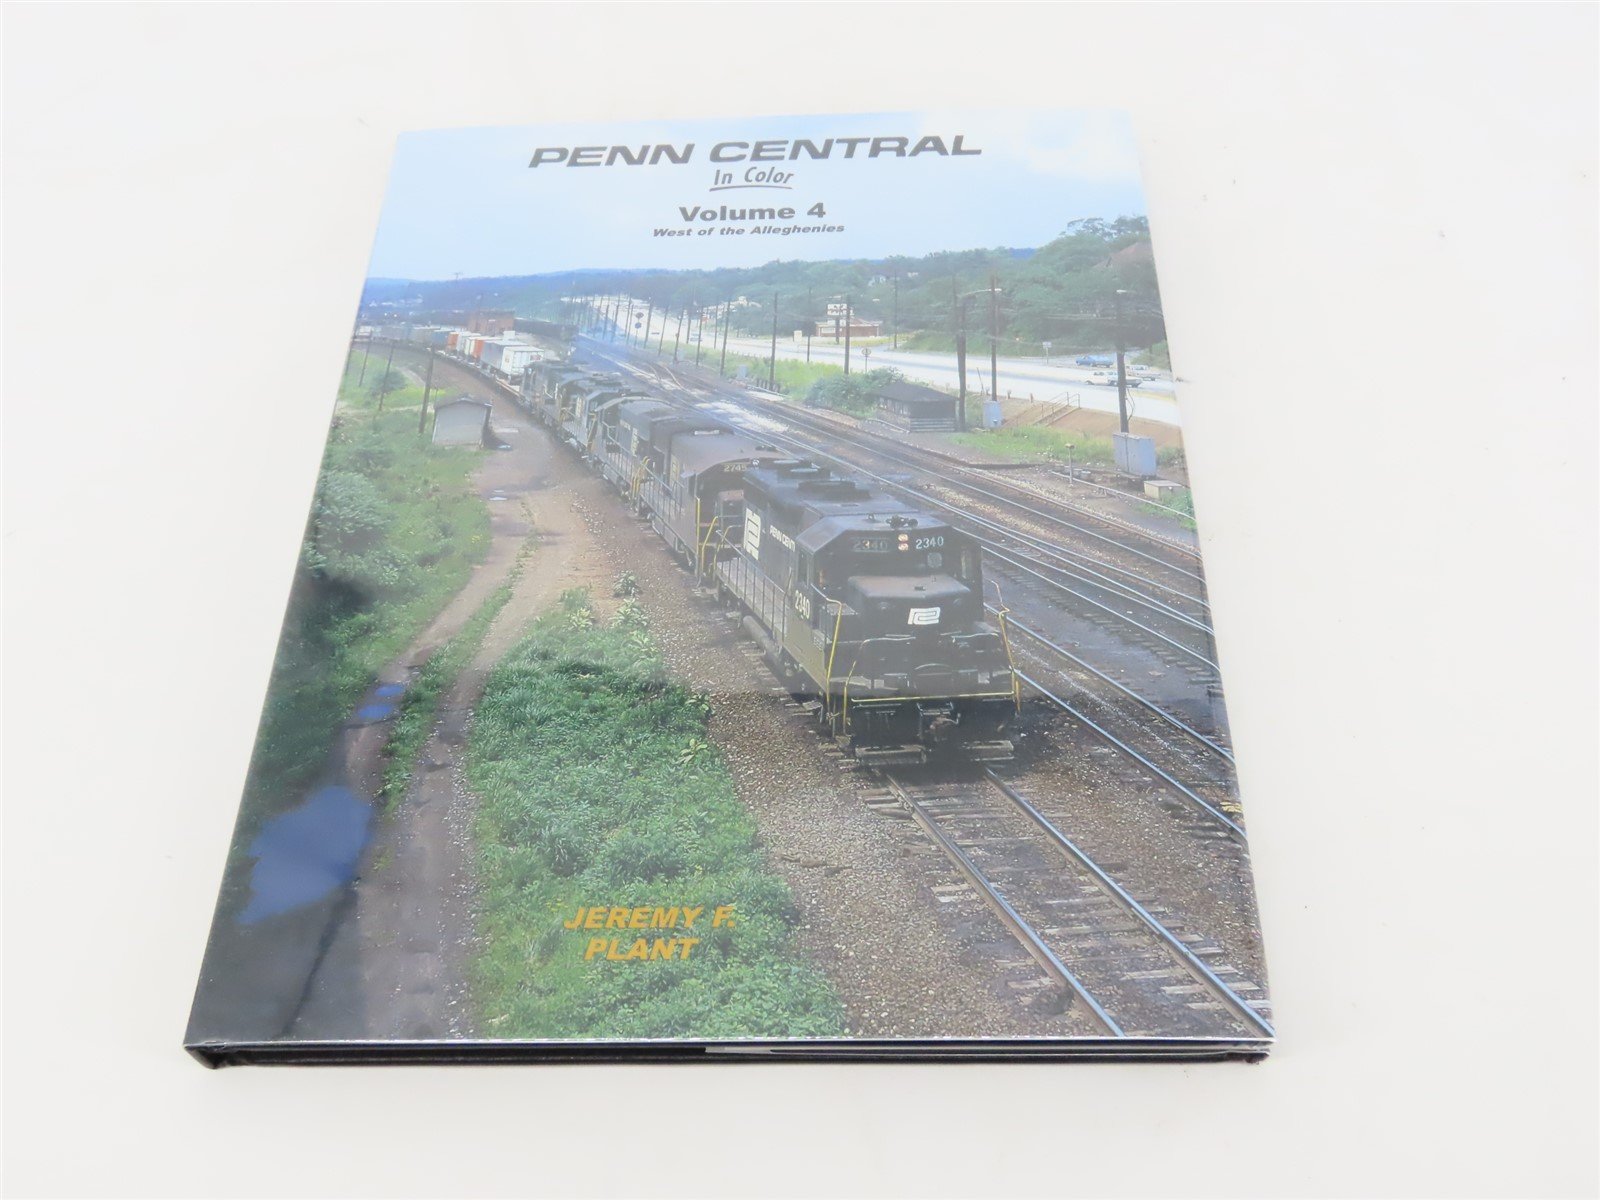 Morning Sun: Penn Central In Color Volume 4 by Jeremy F Plant ©2010 HC Book